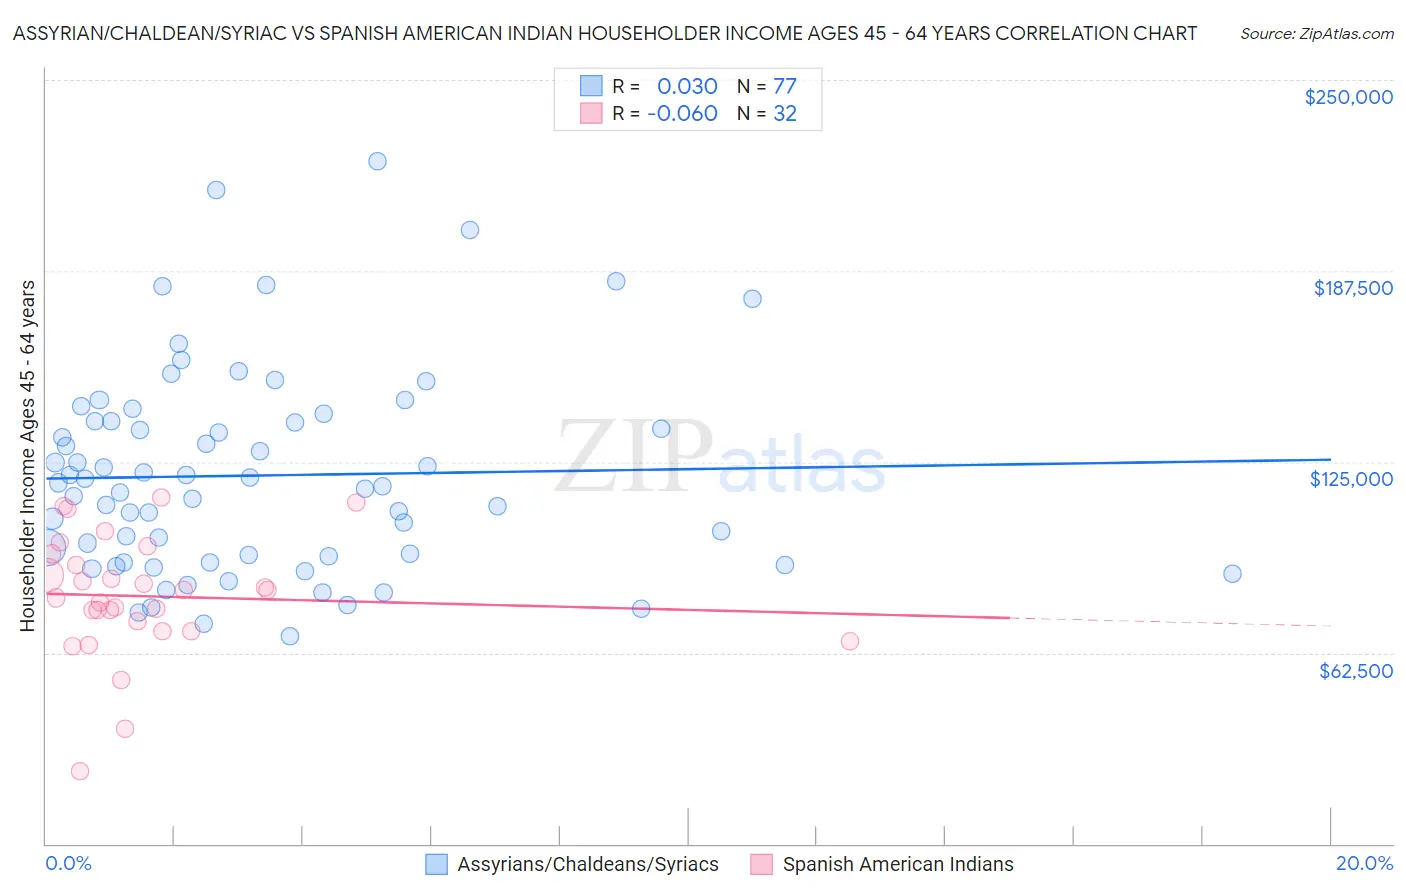 Assyrian/Chaldean/Syriac vs Spanish American Indian Householder Income Ages 45 - 64 years